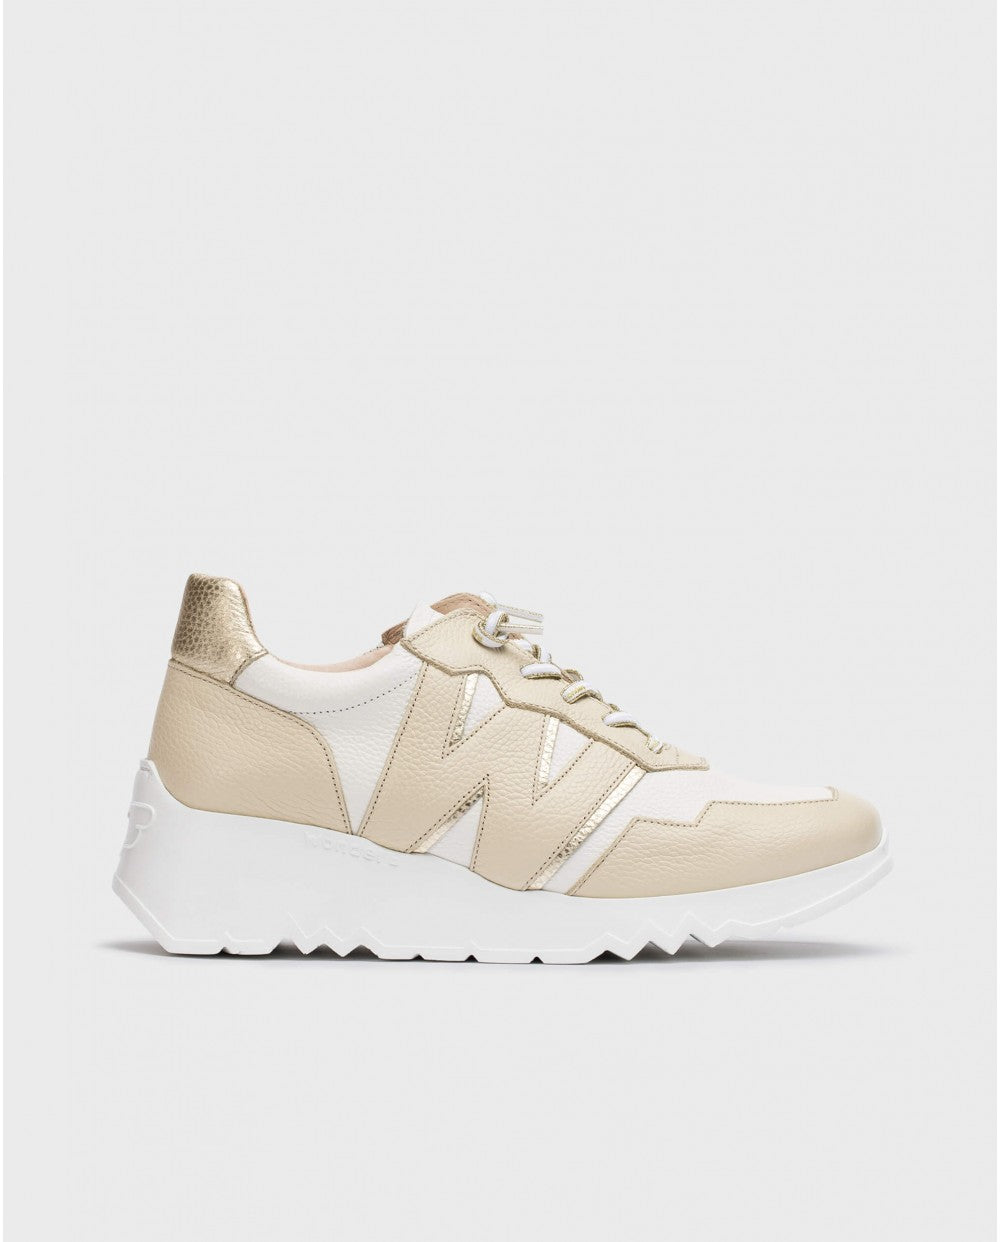 Elegant beige and white Bicolor Kyoto Sneakers with branded 'W' on the side.